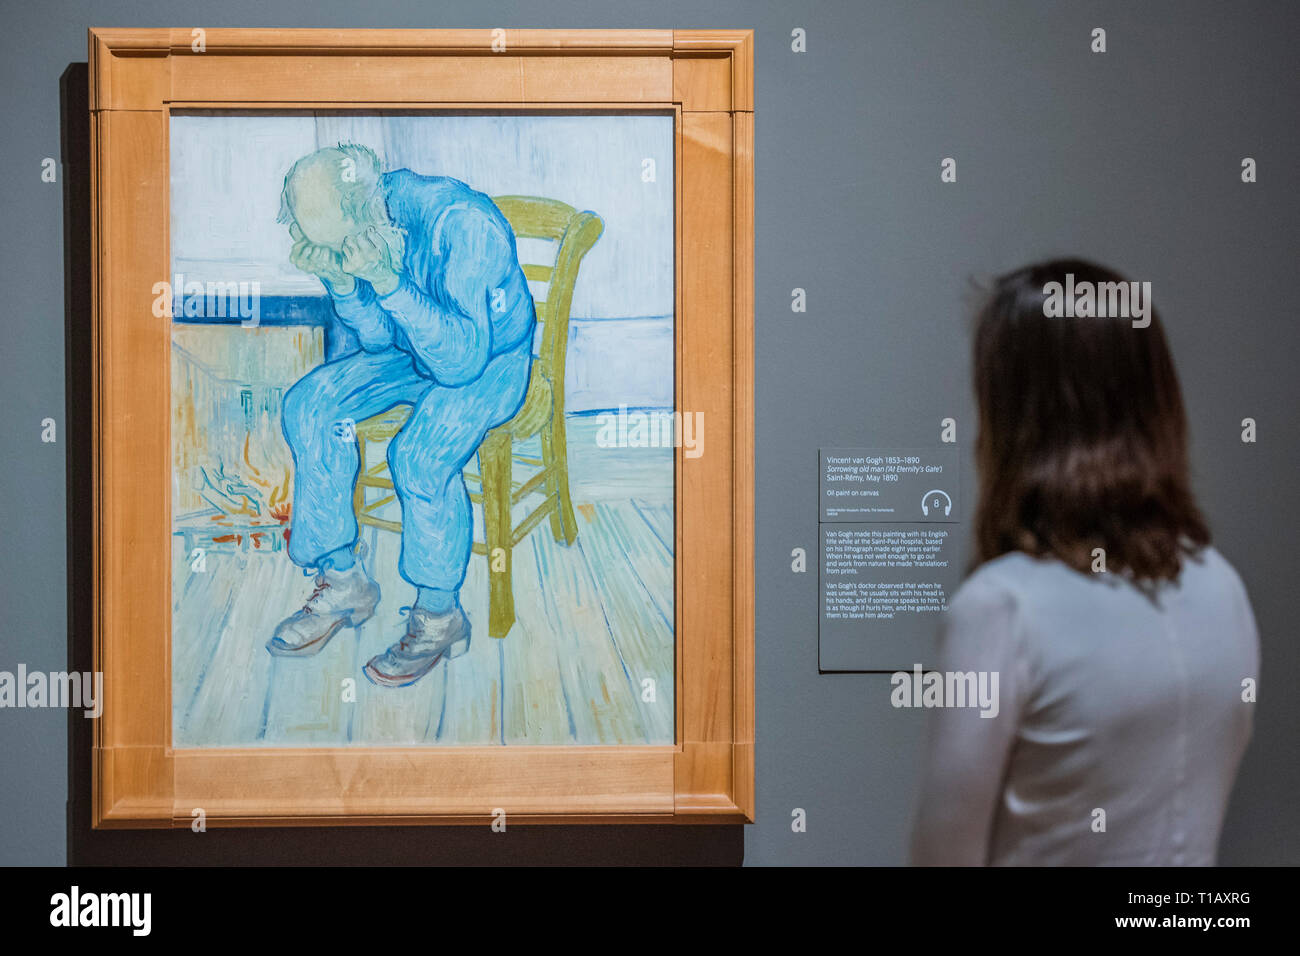 London, UK. 25th March, 2019. Sorrowing old Man (at eternity's gate), 1890, by Vincent Van Gogh - The EY Exhibition: Van Gogh and Britain. This is the first exhibition to take a new look at the artist through his relationship with Britain. It explores how Van Gogh was inspired by British art, literature and and how he in turn inspired British artists, from Walter Sickert to Francis Bacon. Bringing together the largest group of Van Gogh paintings shown in the UK for nearly a decade, the exhibition includes over 50 works by the artist from public and private collections around the world. Credit: Stock Photo